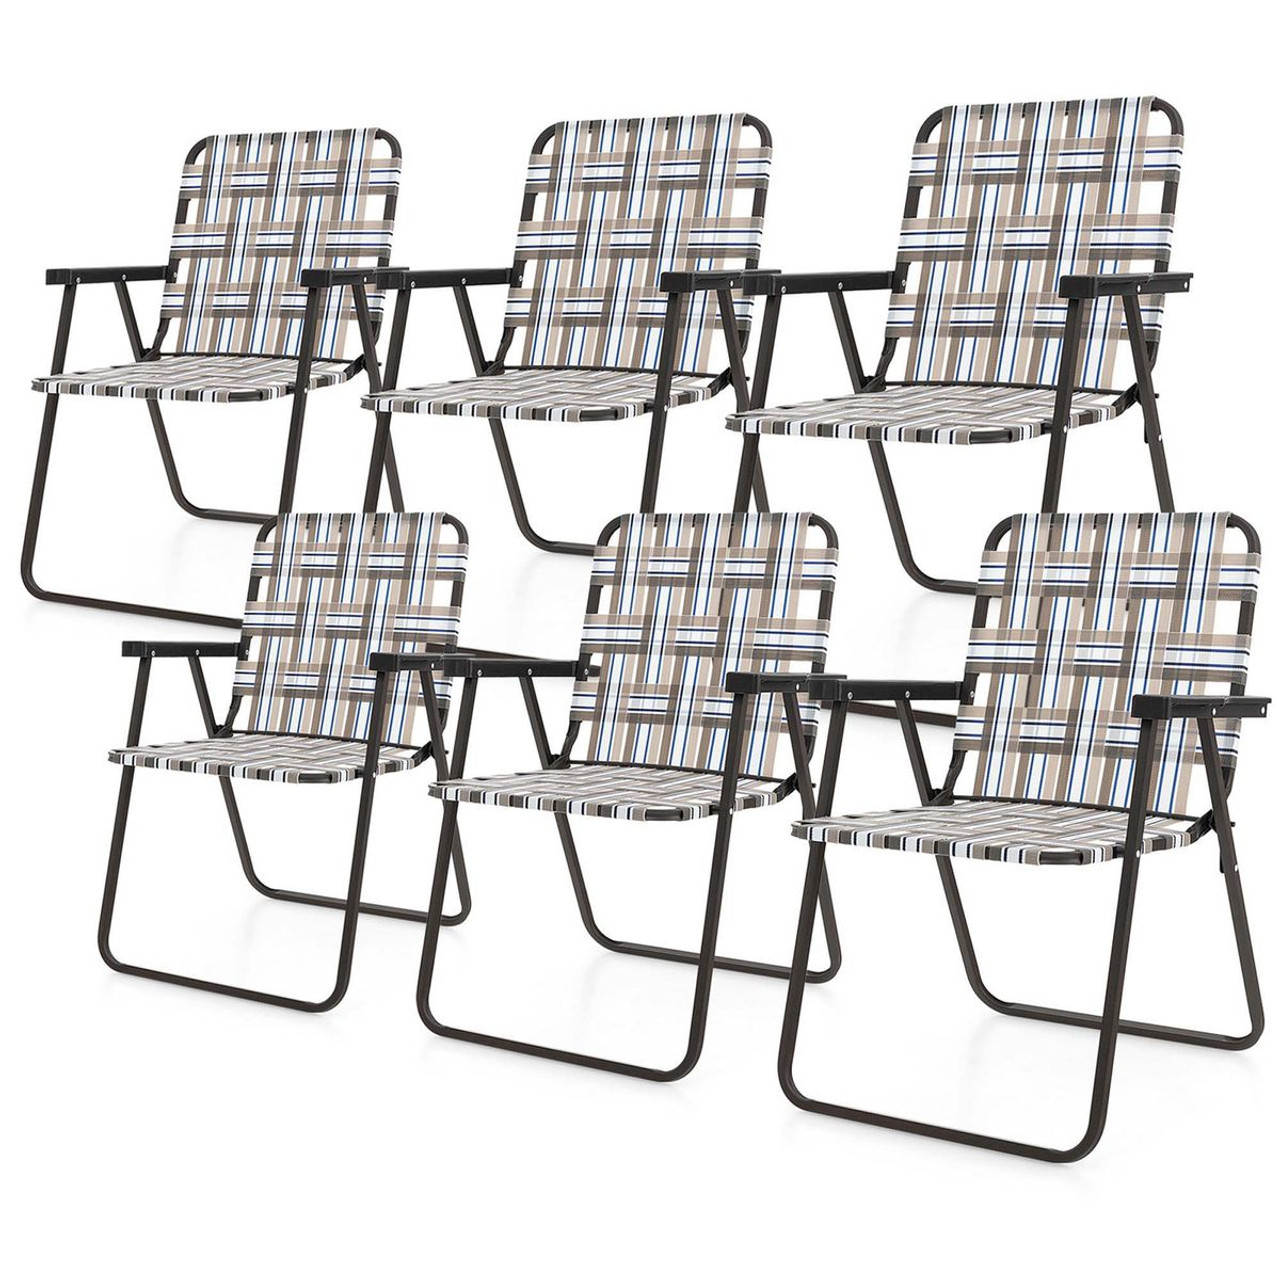 Lightweight Folding Lawn Webbing Chair (2- to 6-Pack) product image